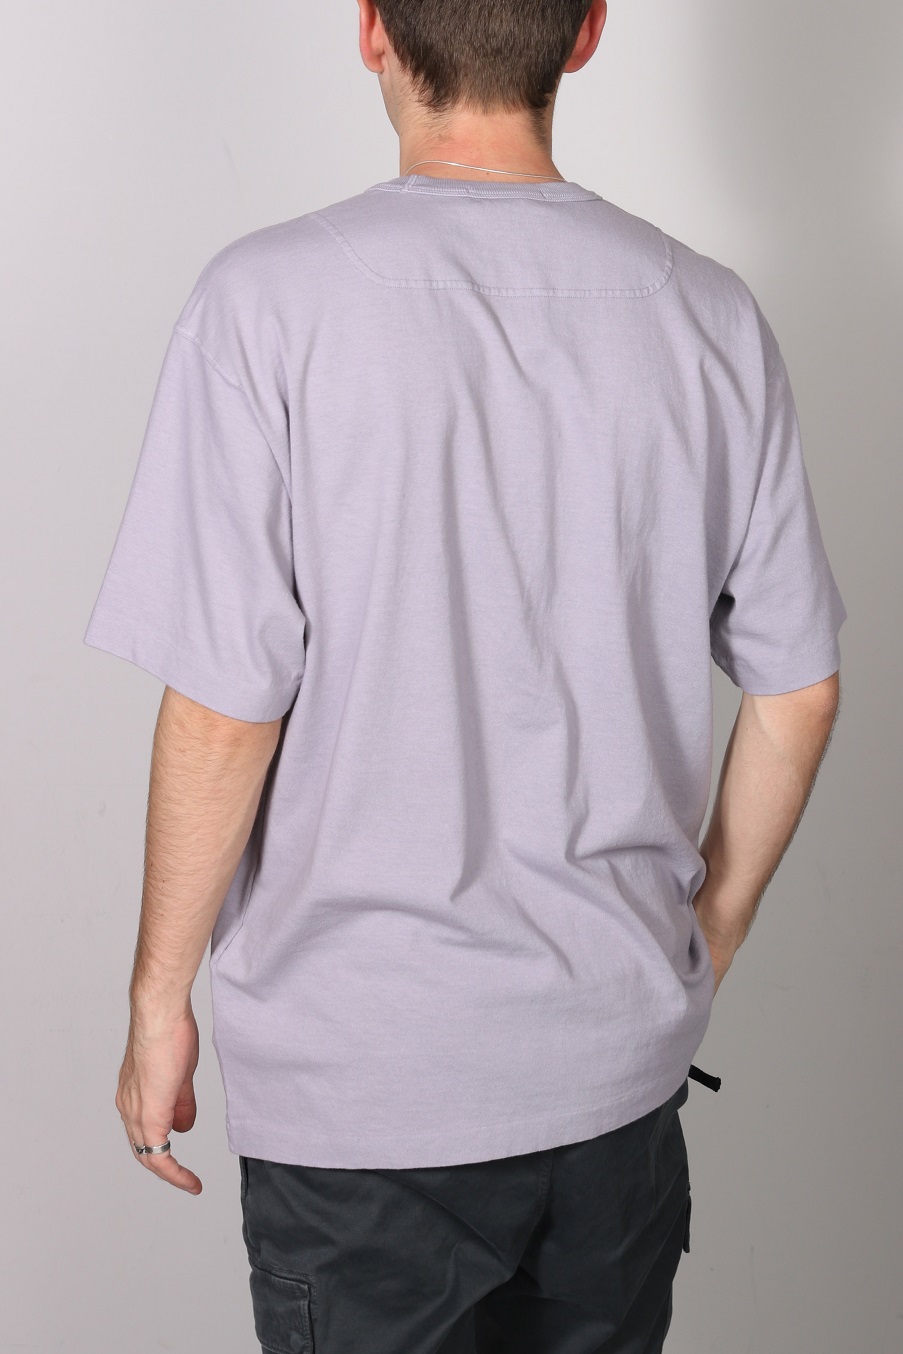 STONE ISLAND Oversized Stamp T-Shirt in Lavender S